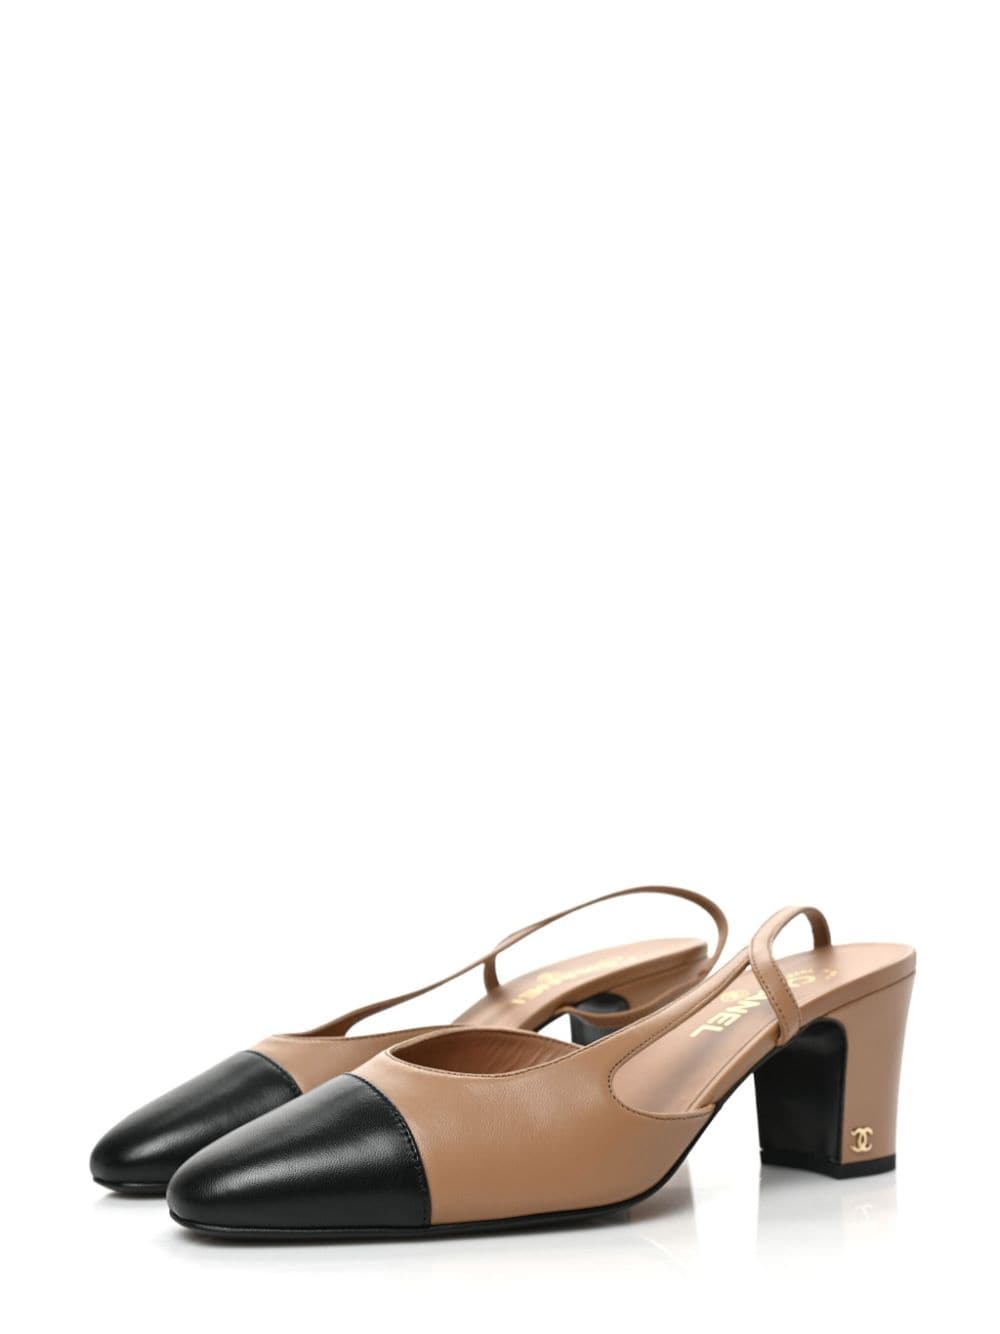 Pre-owned Chanel Cap Toe Cc Slingback Pumps In Brown